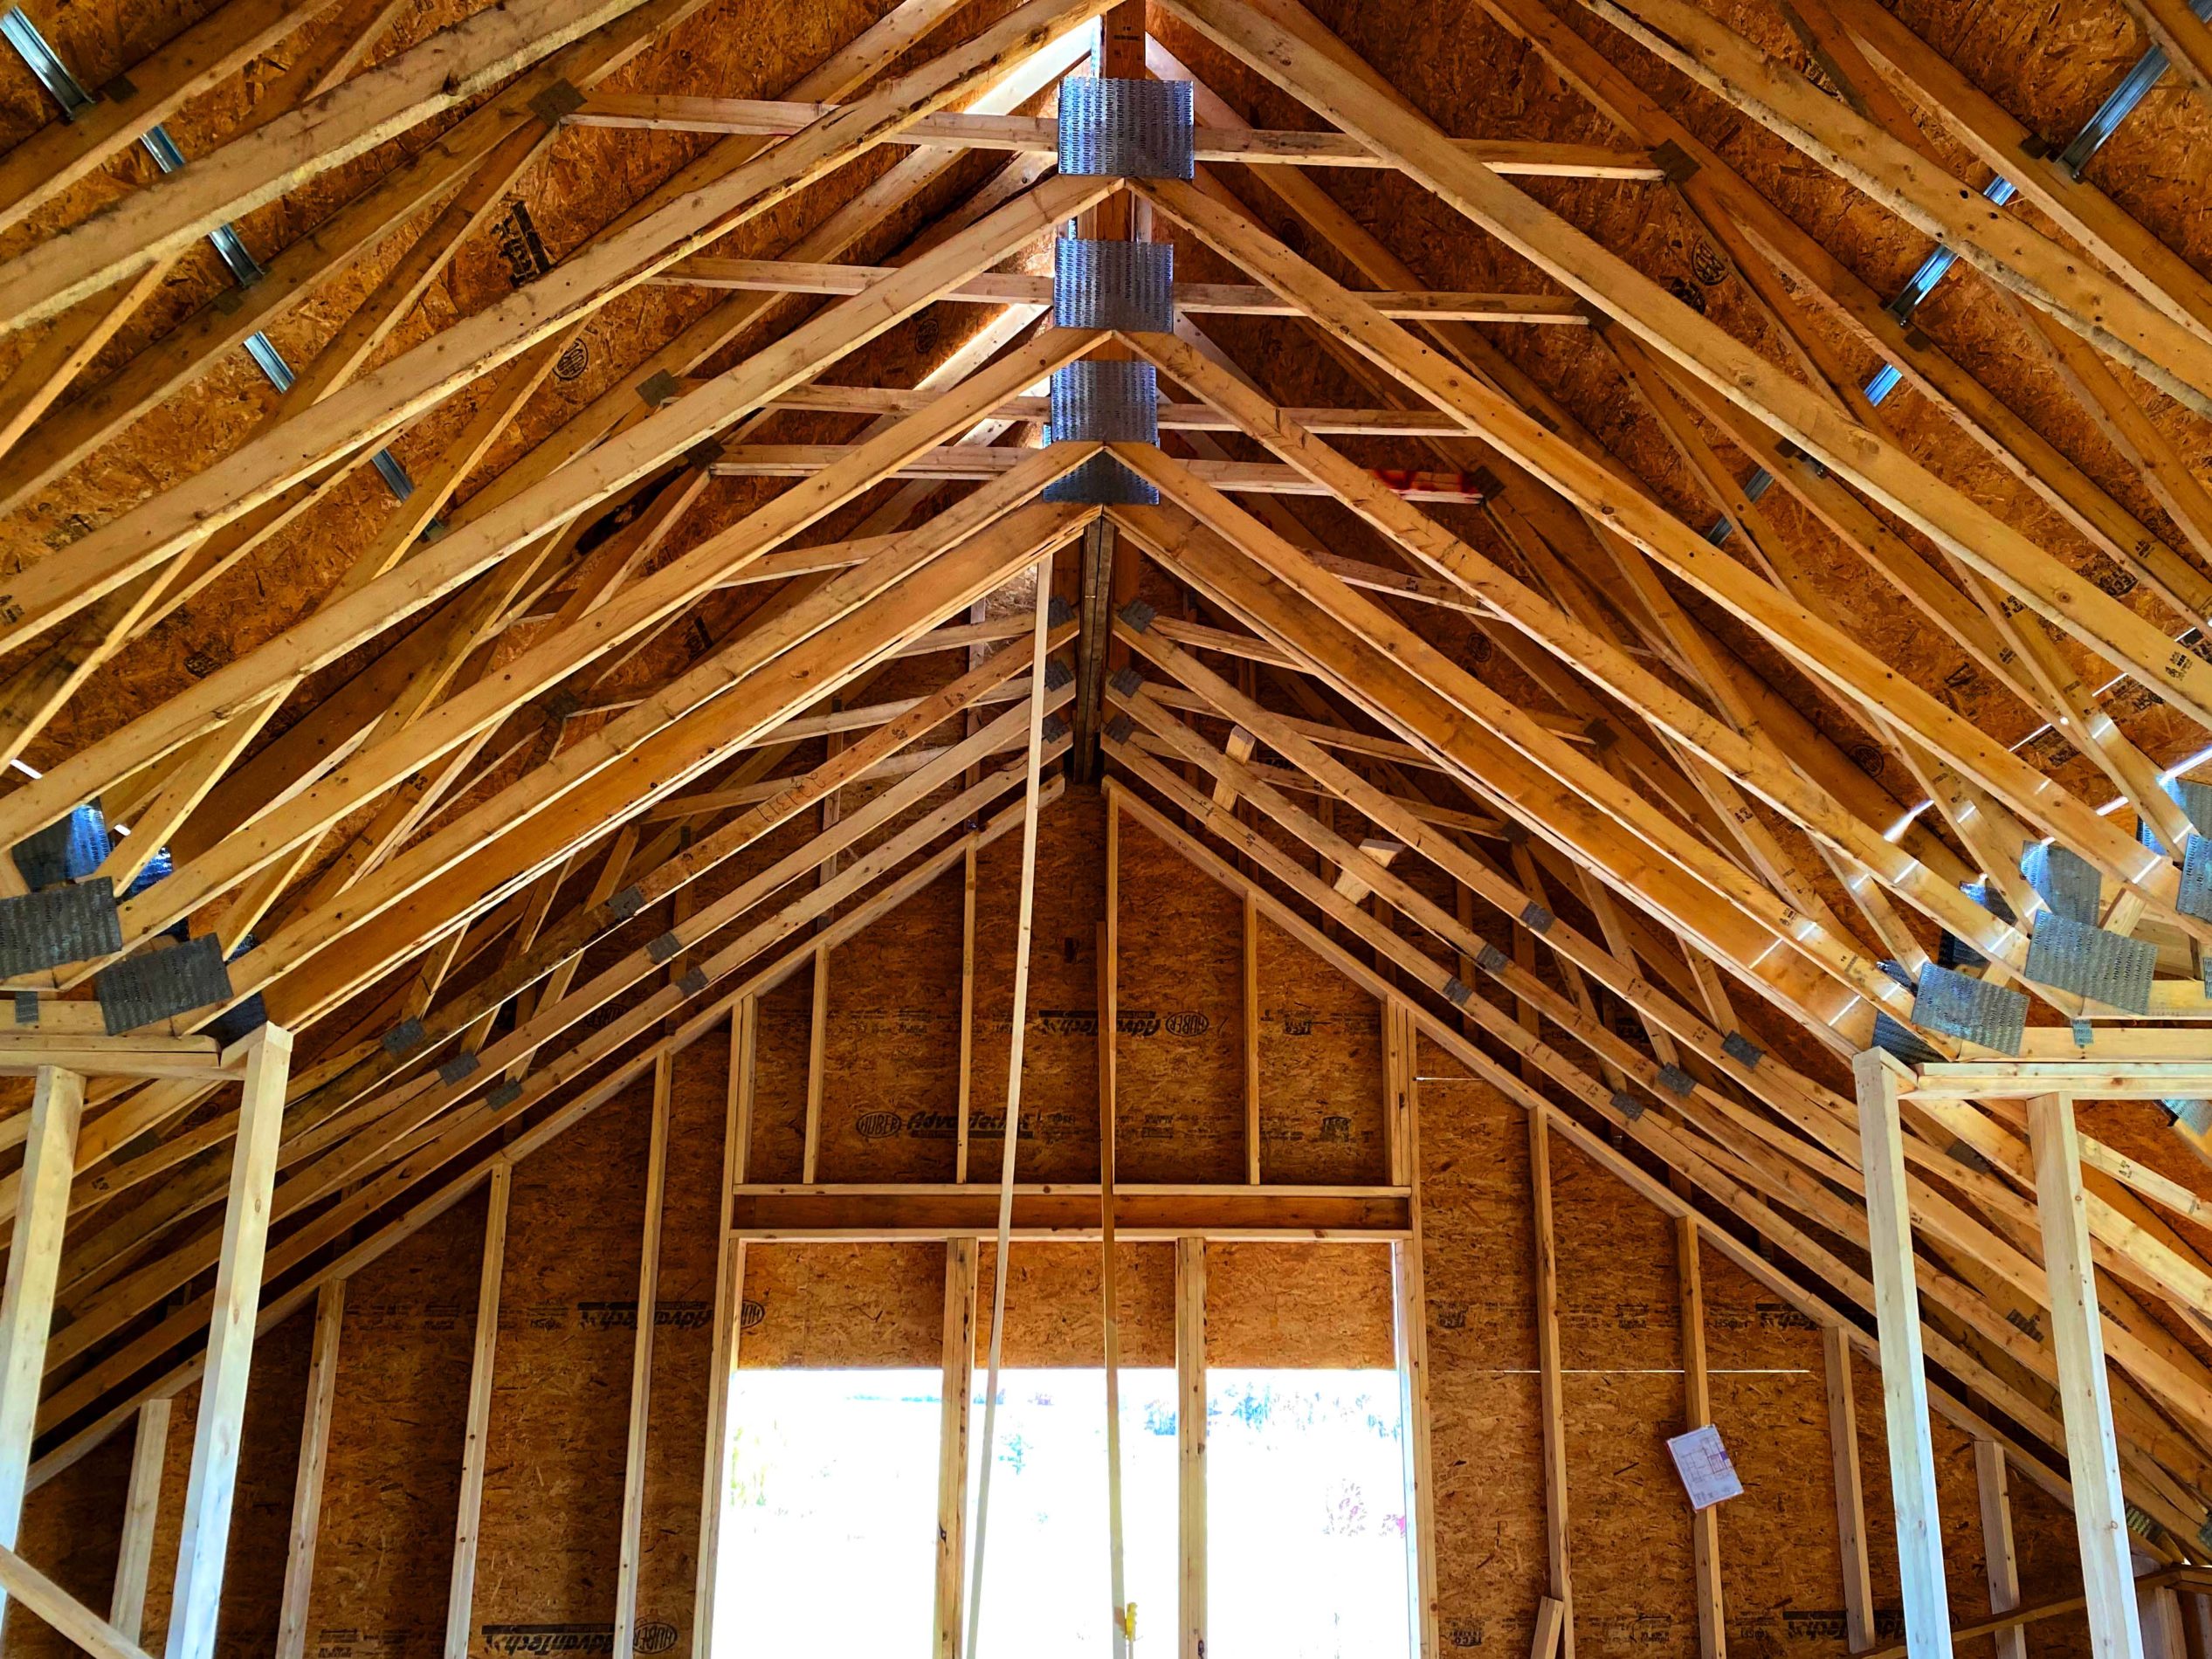 East Coast Radiant Ceiling Project With Sweeney DesignBuild